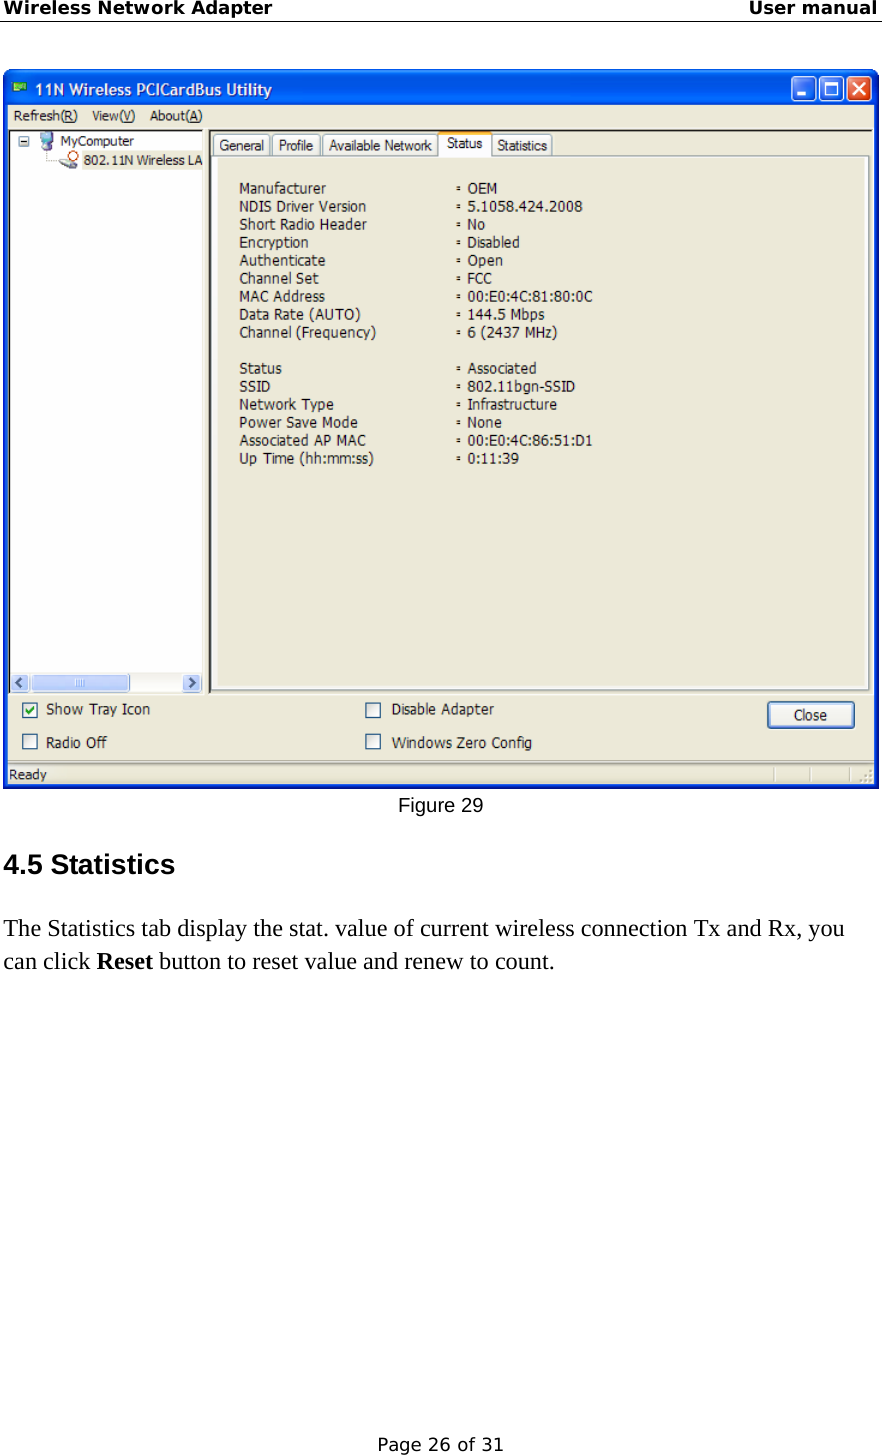 Wireless Network Adapter                                                    User manual Page 26 of 31  Figure 29 4.5 Statistics The Statistics tab display the stat. value of current wireless connection Tx and Rx, you can click Reset button to reset value and renew to count. 